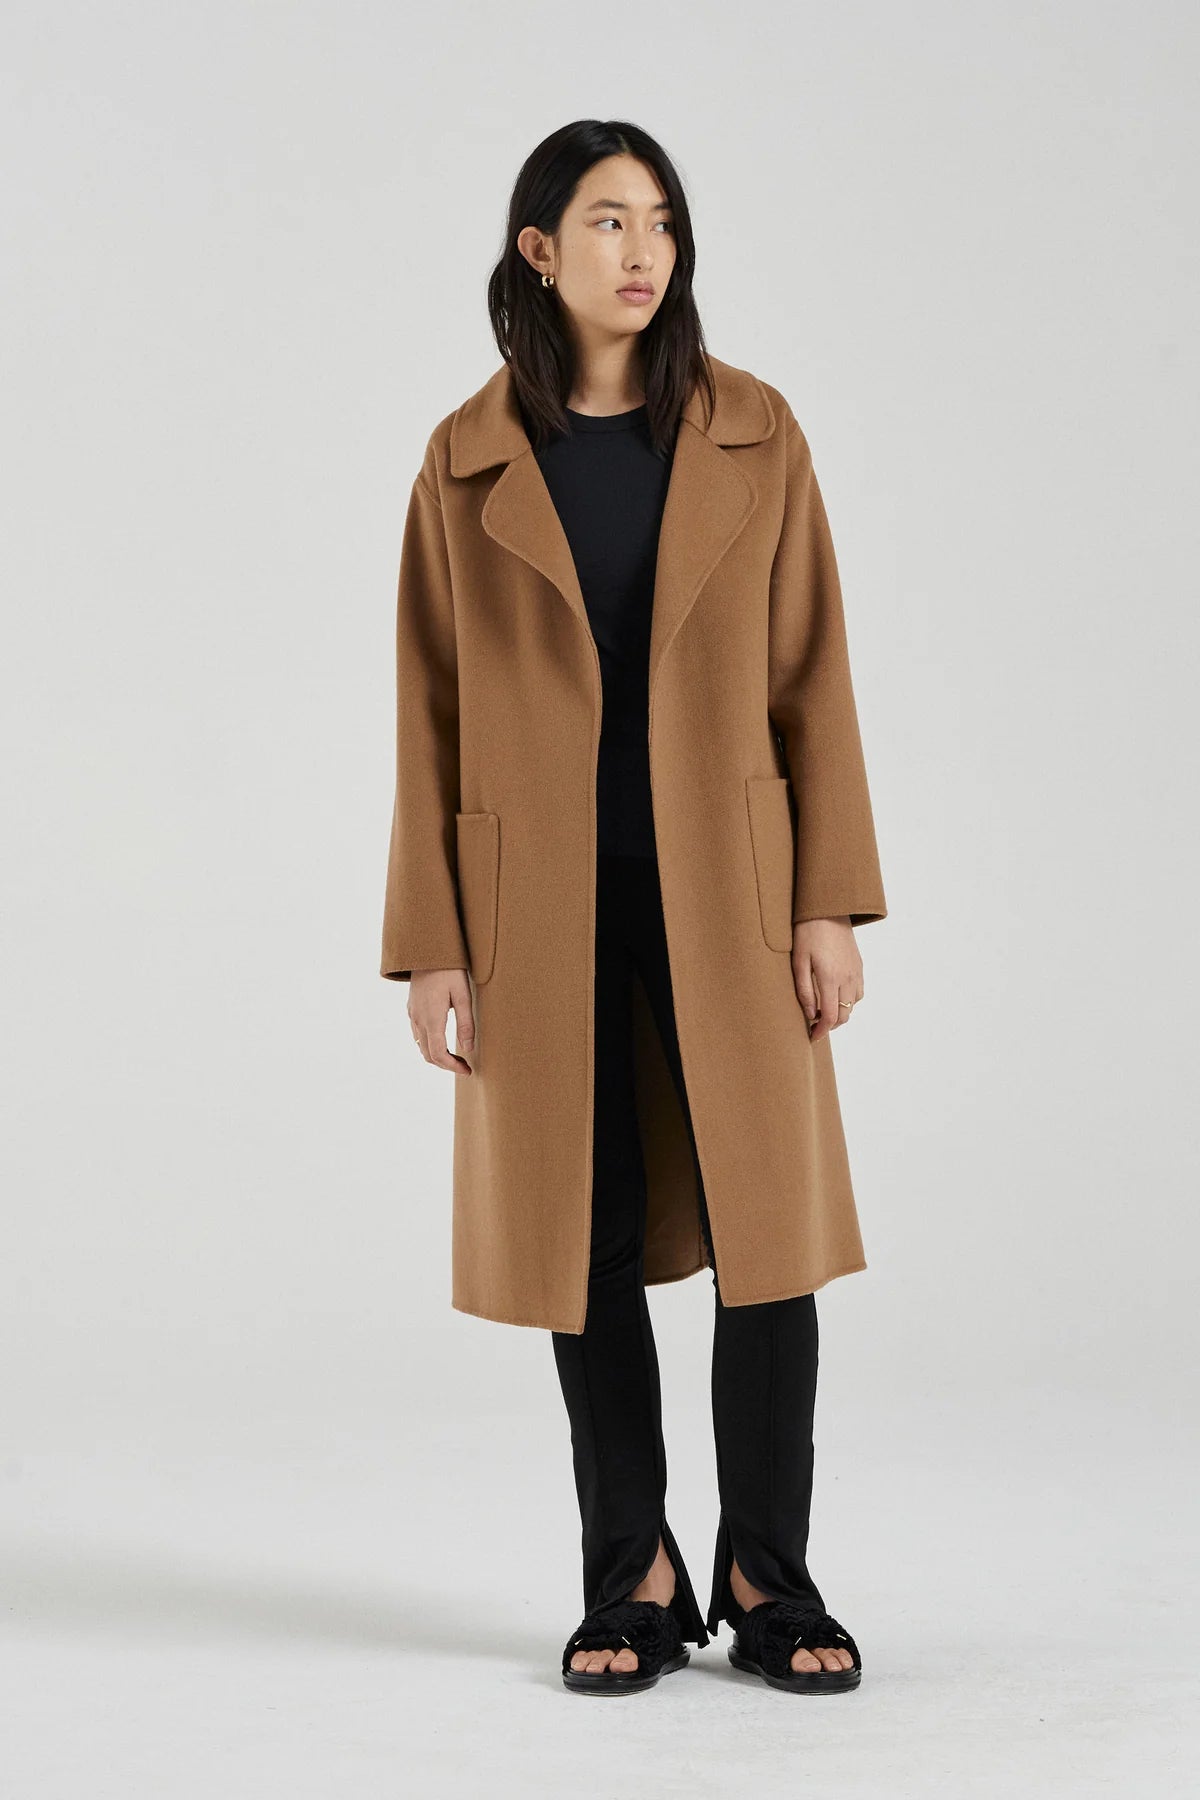 THE MATILDA COAT - CAMEL WOOL - FRIENDS WITH FRANK